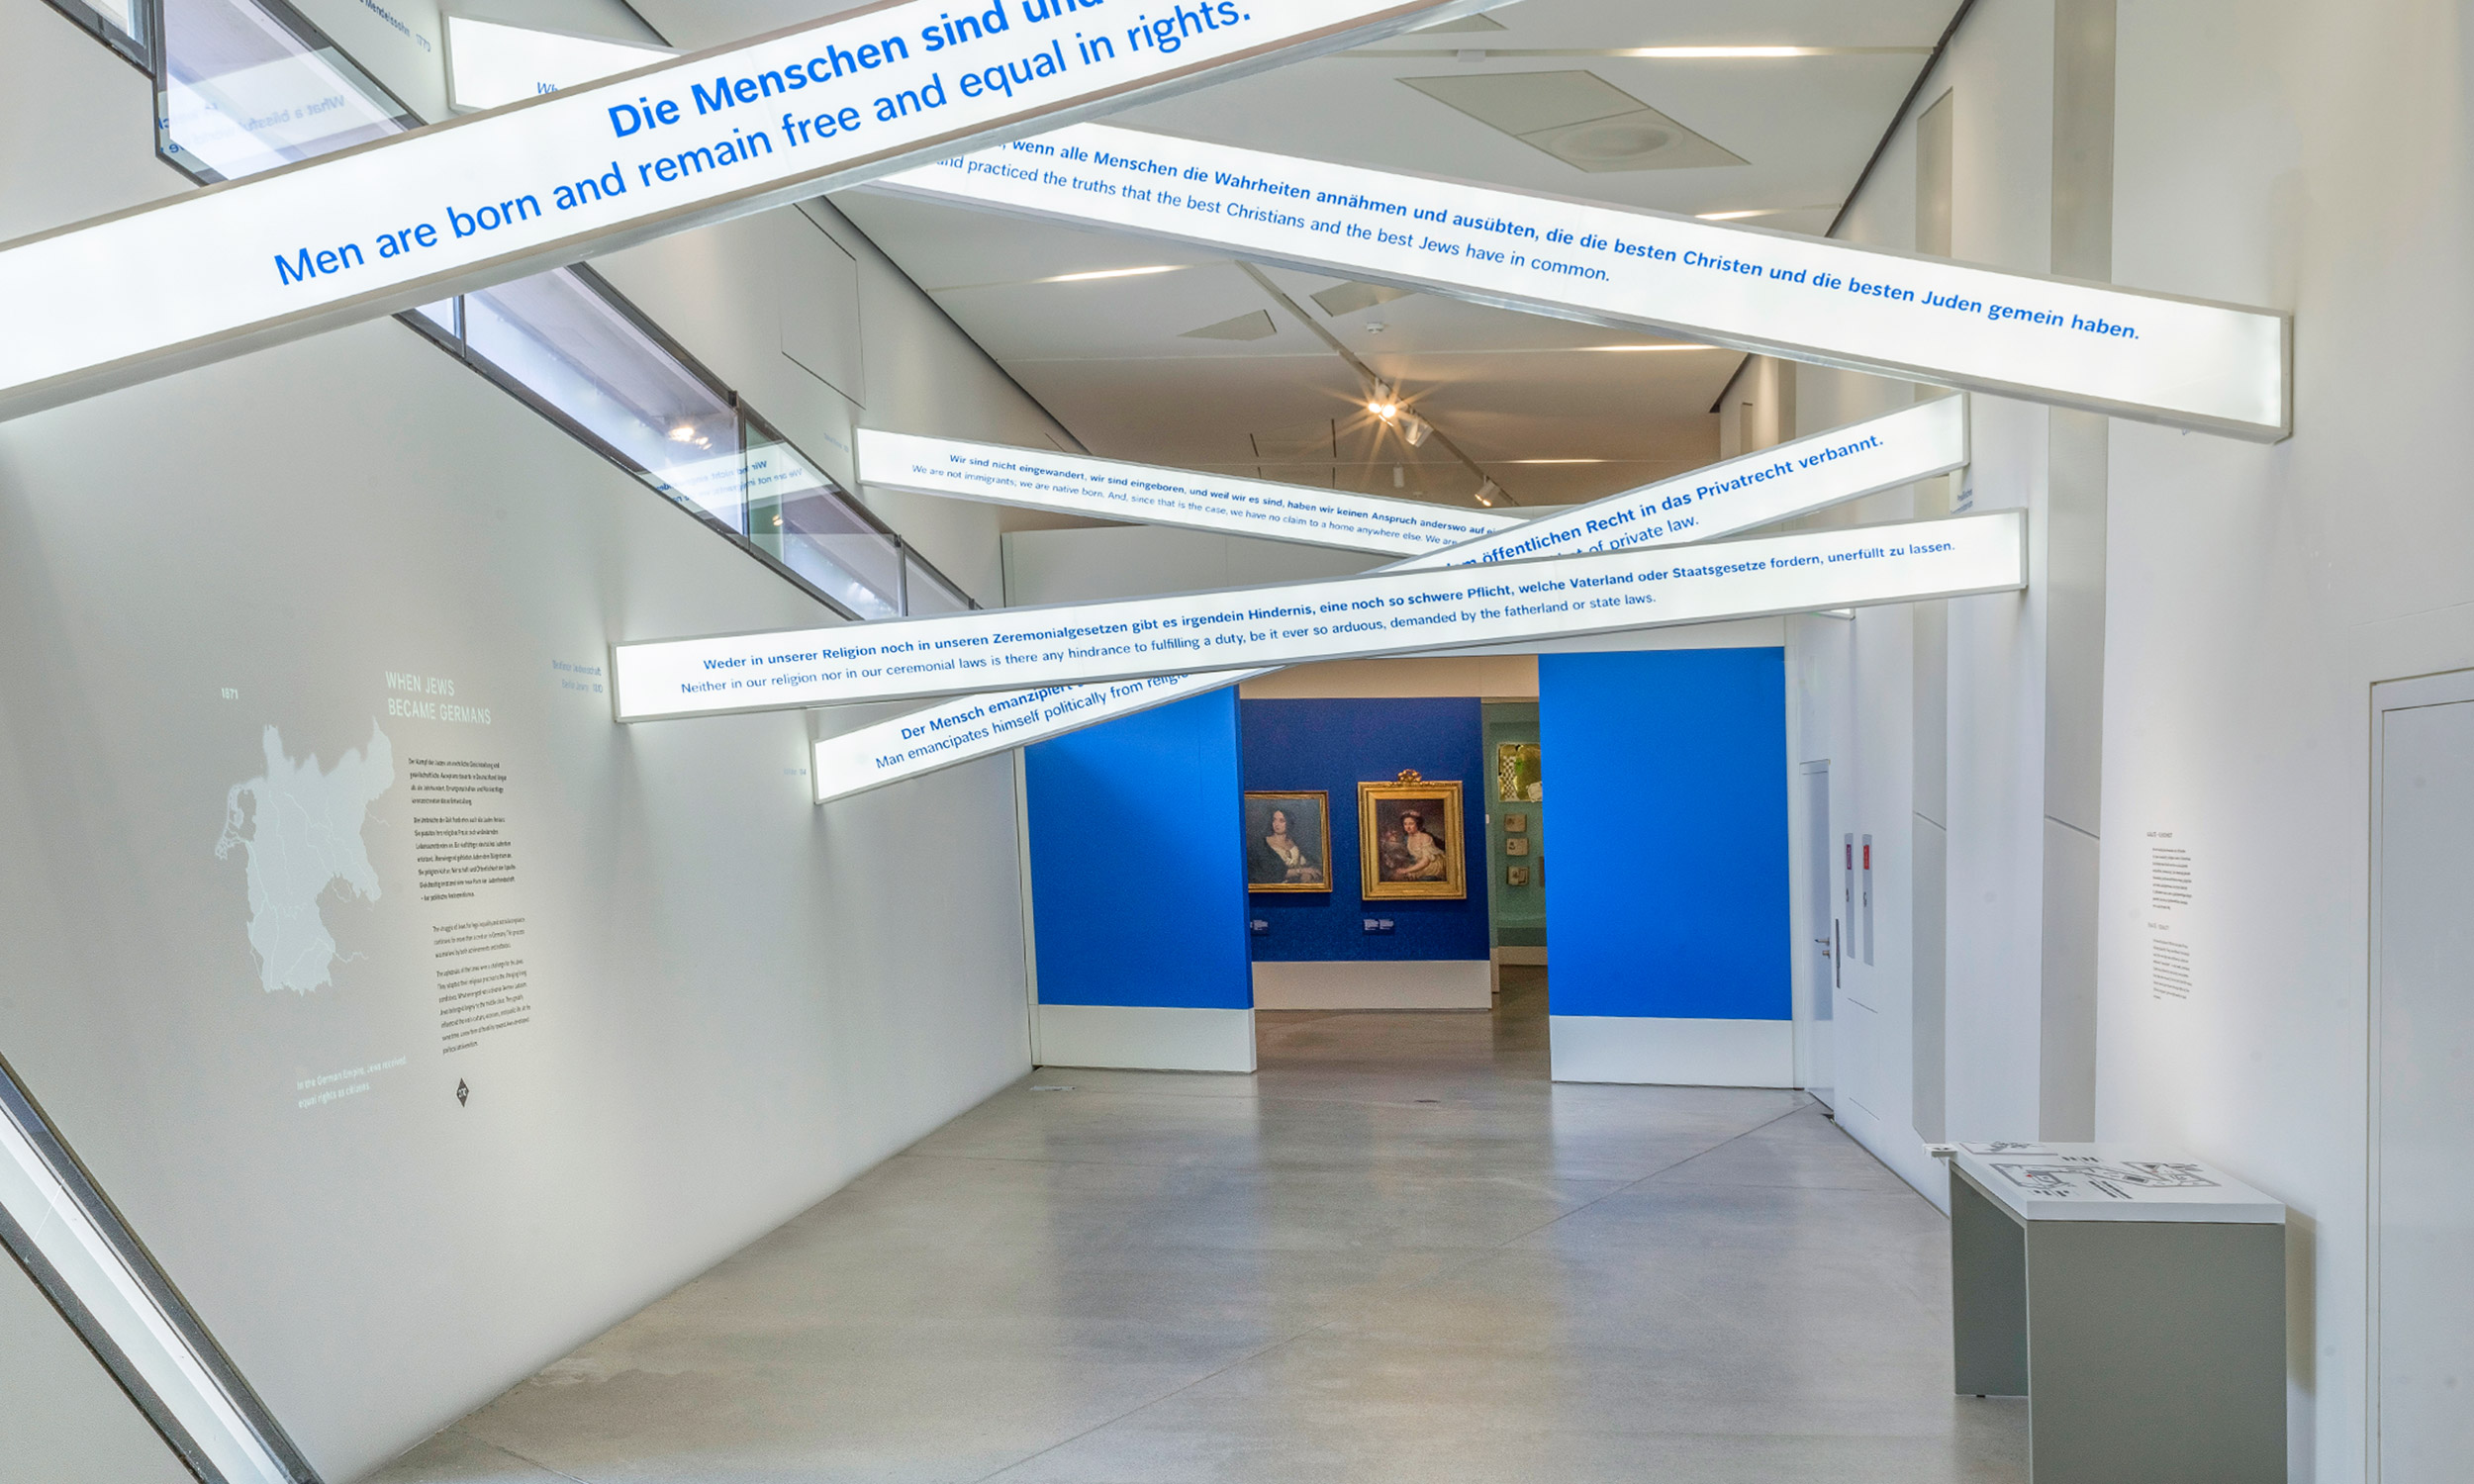 Photo of an interior of the Jewish Museum in Berlin. The room looks like a hallway. At the end of the hallway is an exhibition wall, on which hang two paintings. In the upper part of the room, near the ceiling, there are several white struts with quotes written on them in blue letters on a white background. On the right side, standing against the wall, you can see a tactile plan, which serves the orientation of visually impaired people in the museum building.